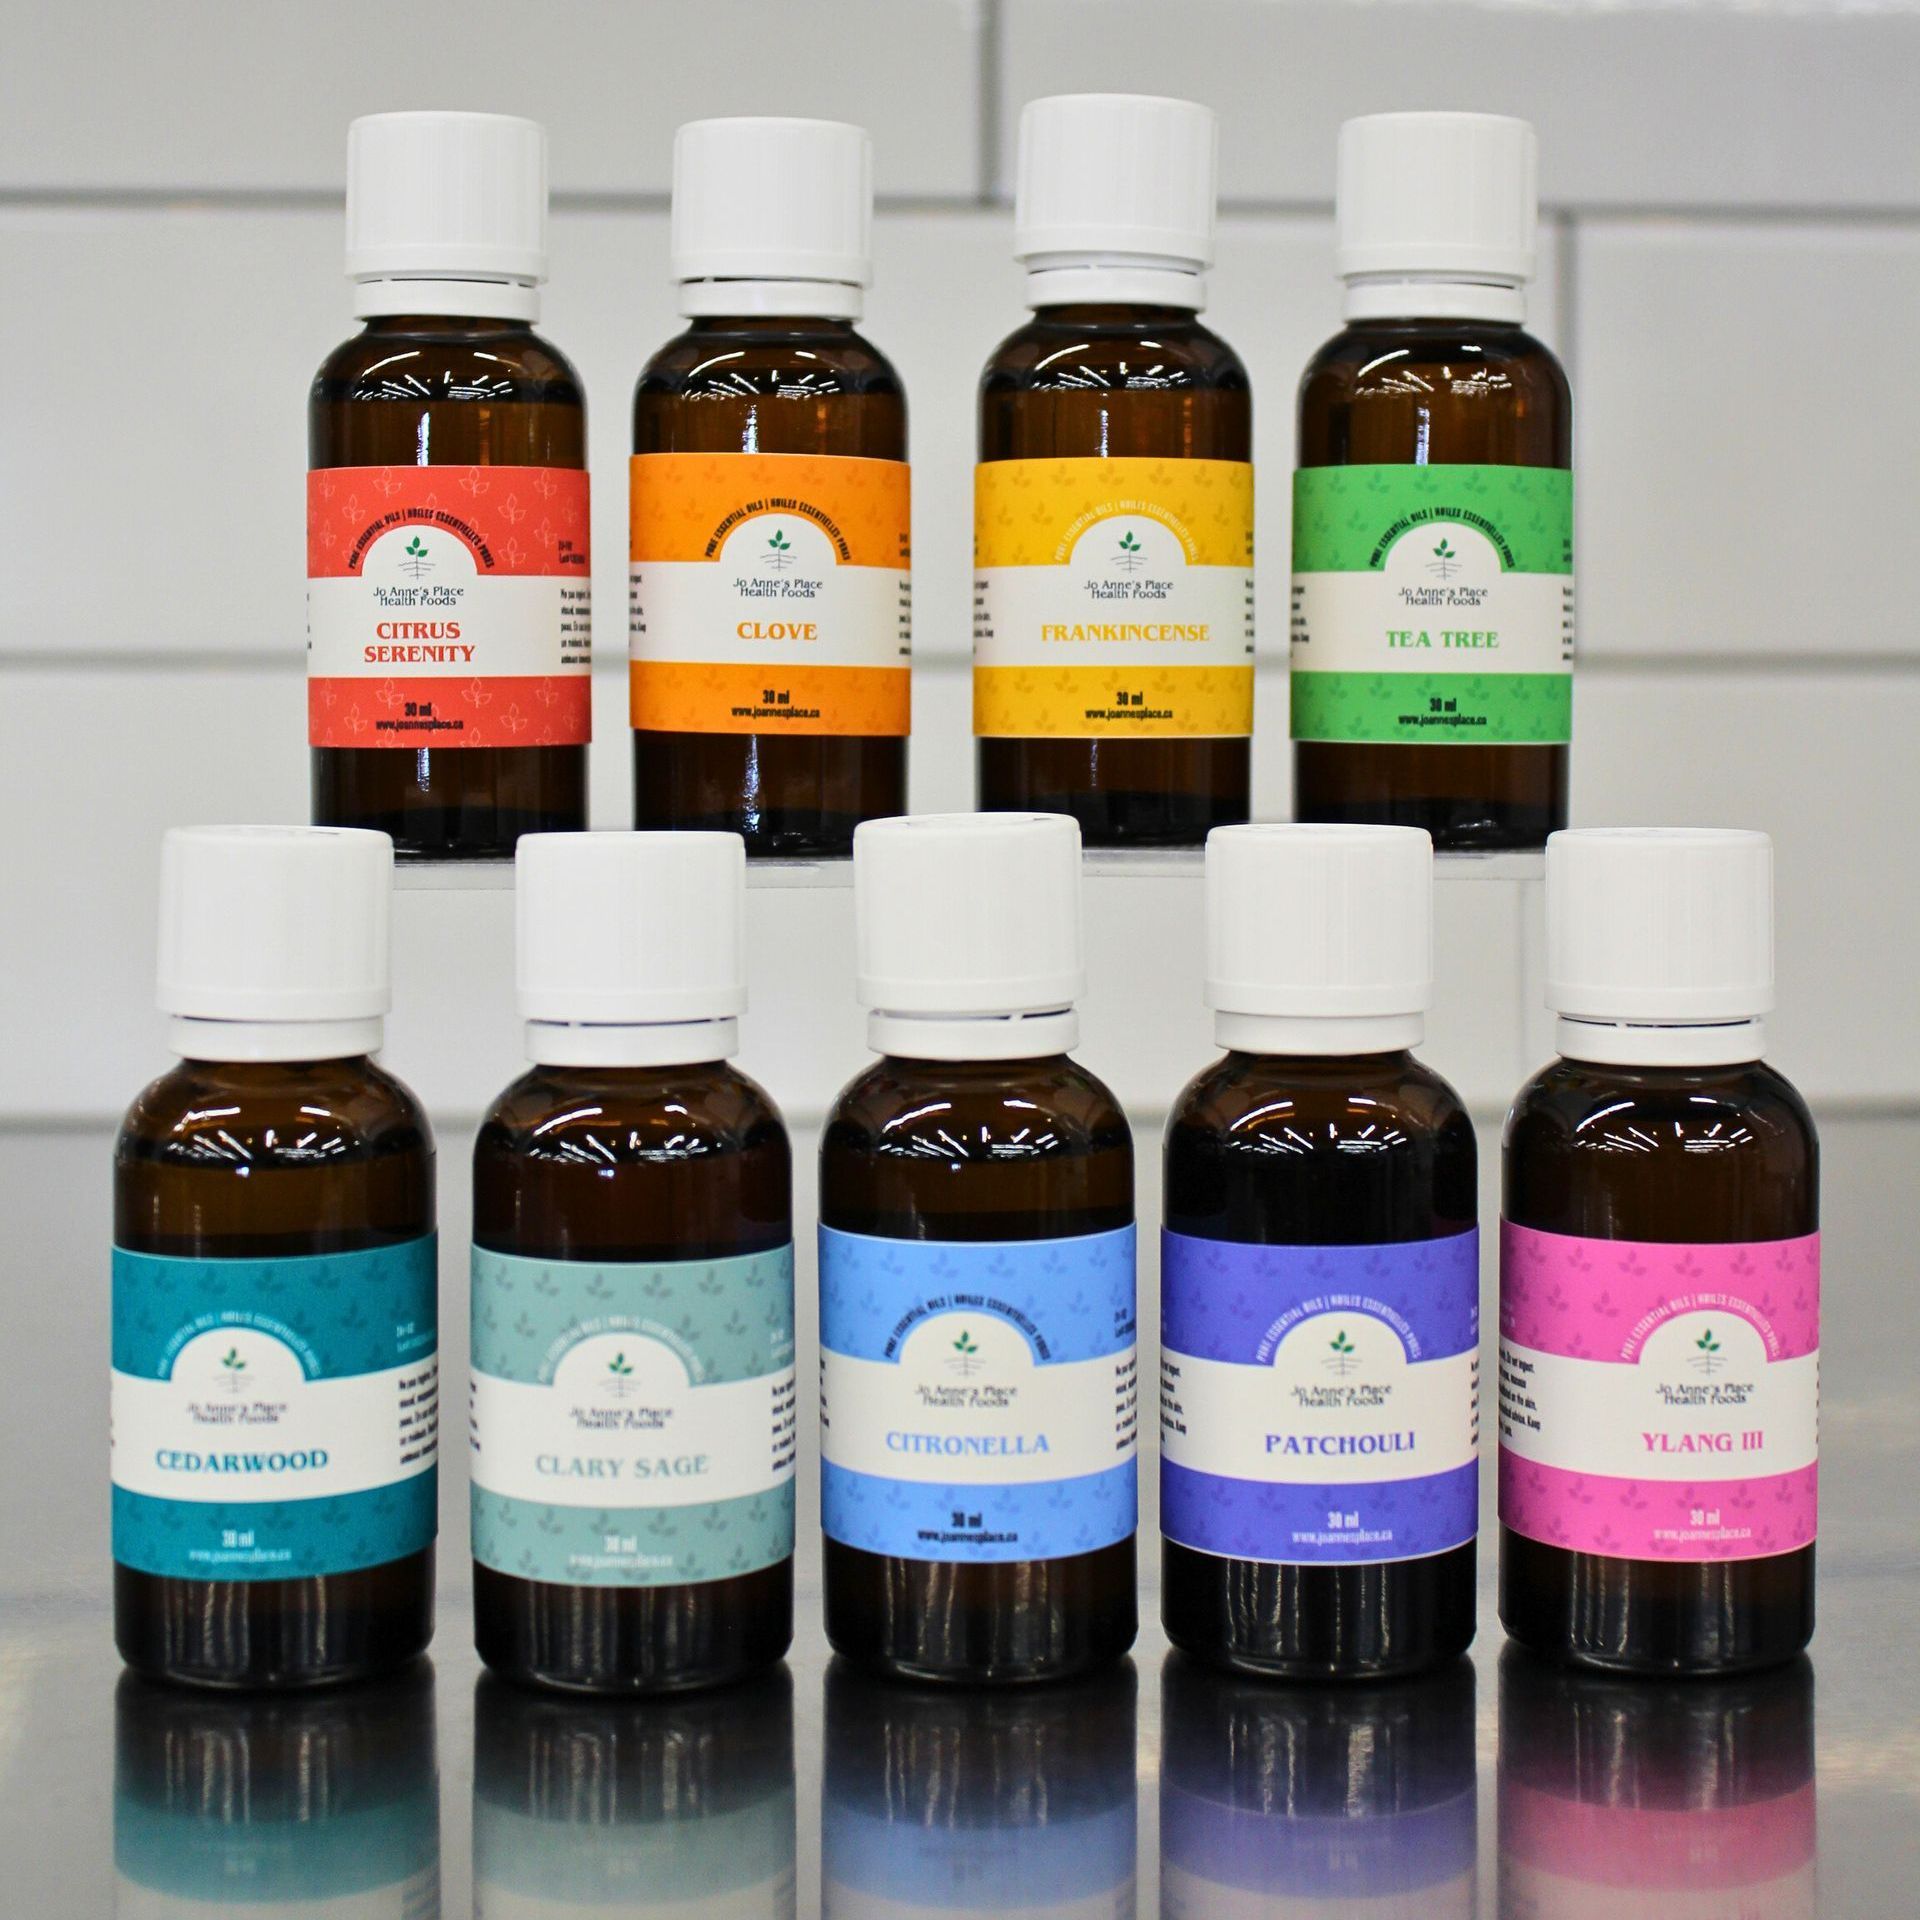 Jo anne's place essential oils and carrier oil bottles